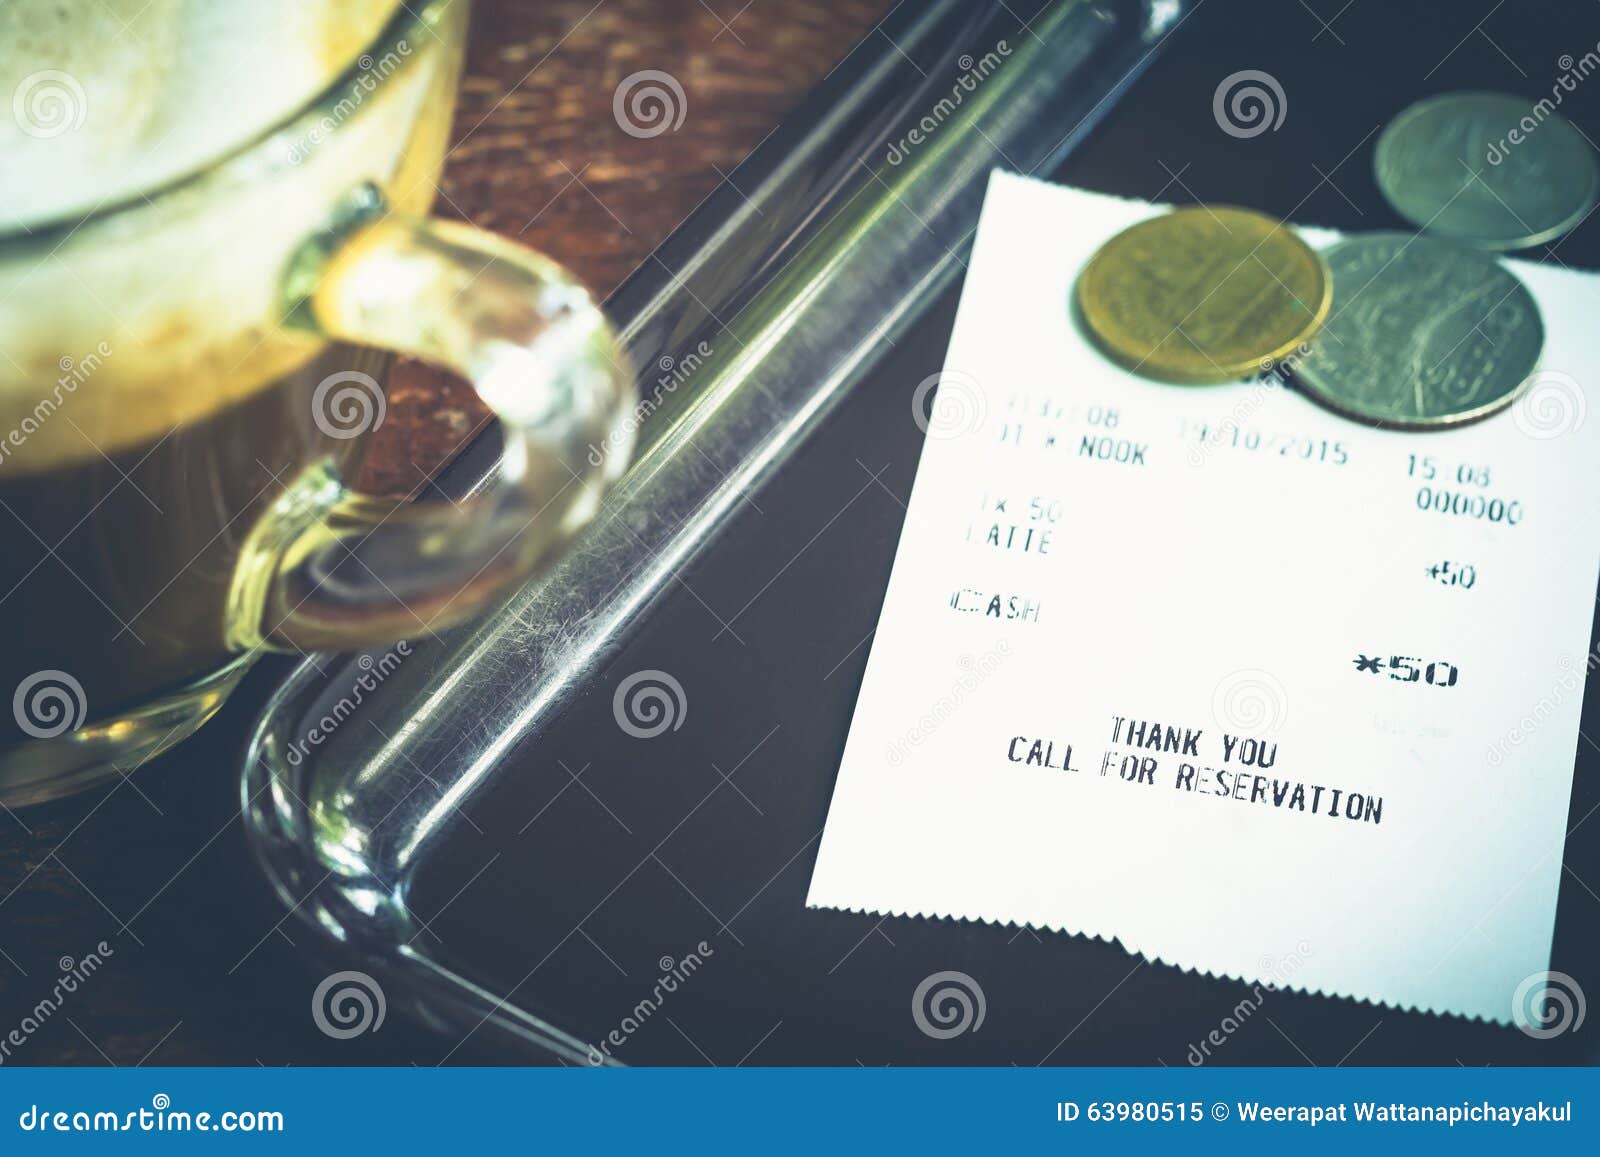 coffee-receipt-stock-image-image-of-money-receipt-payment-63980515